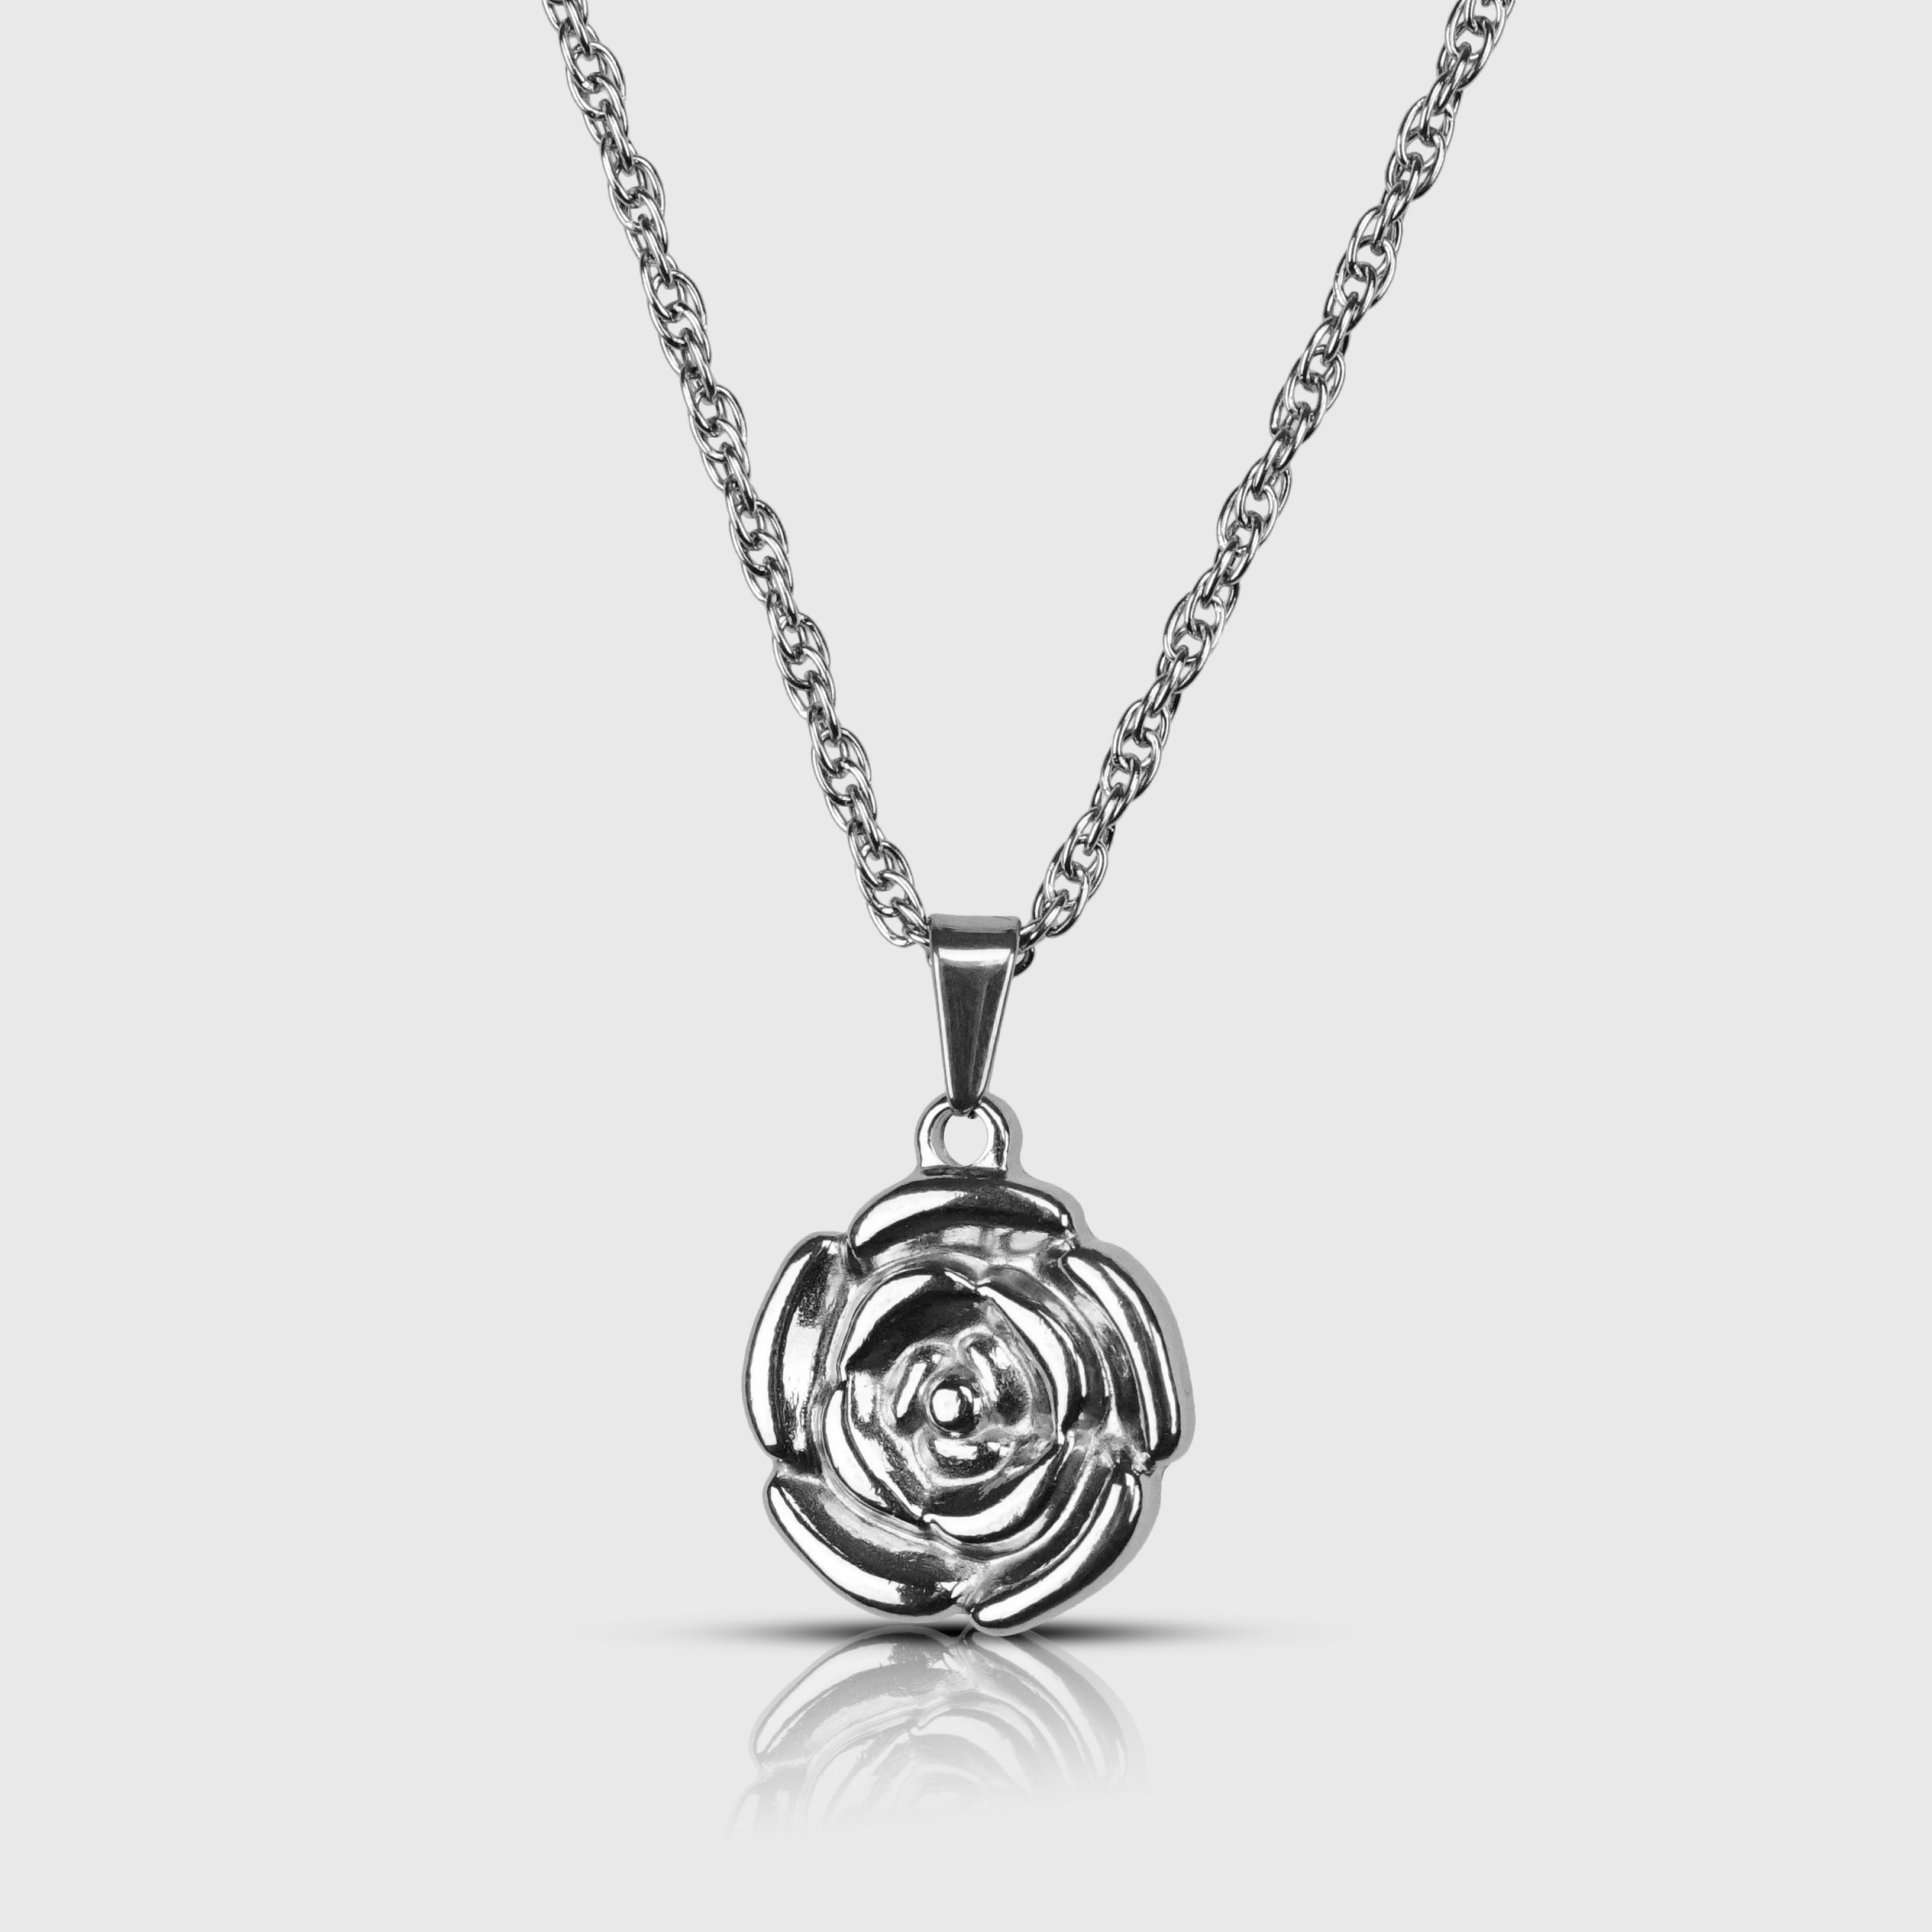 ROSEHEAD NECKLACE - SILVER TONE